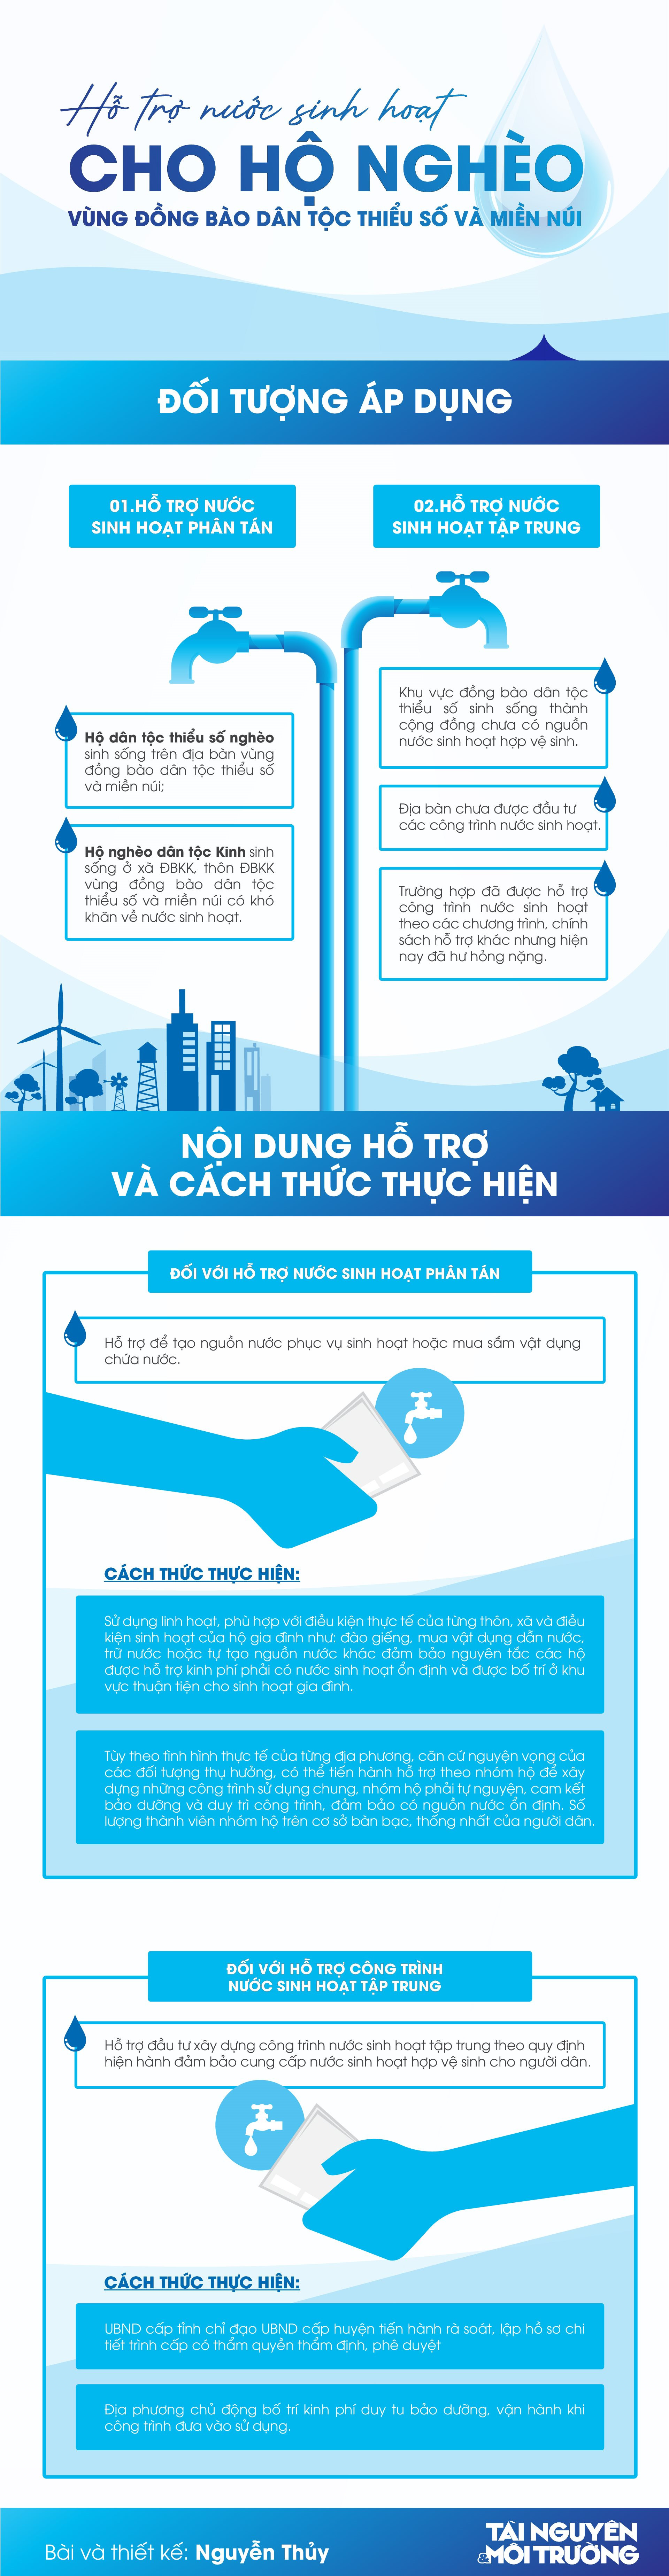 infographic_ho-tro-nuoc-sinh-hoat.jpg